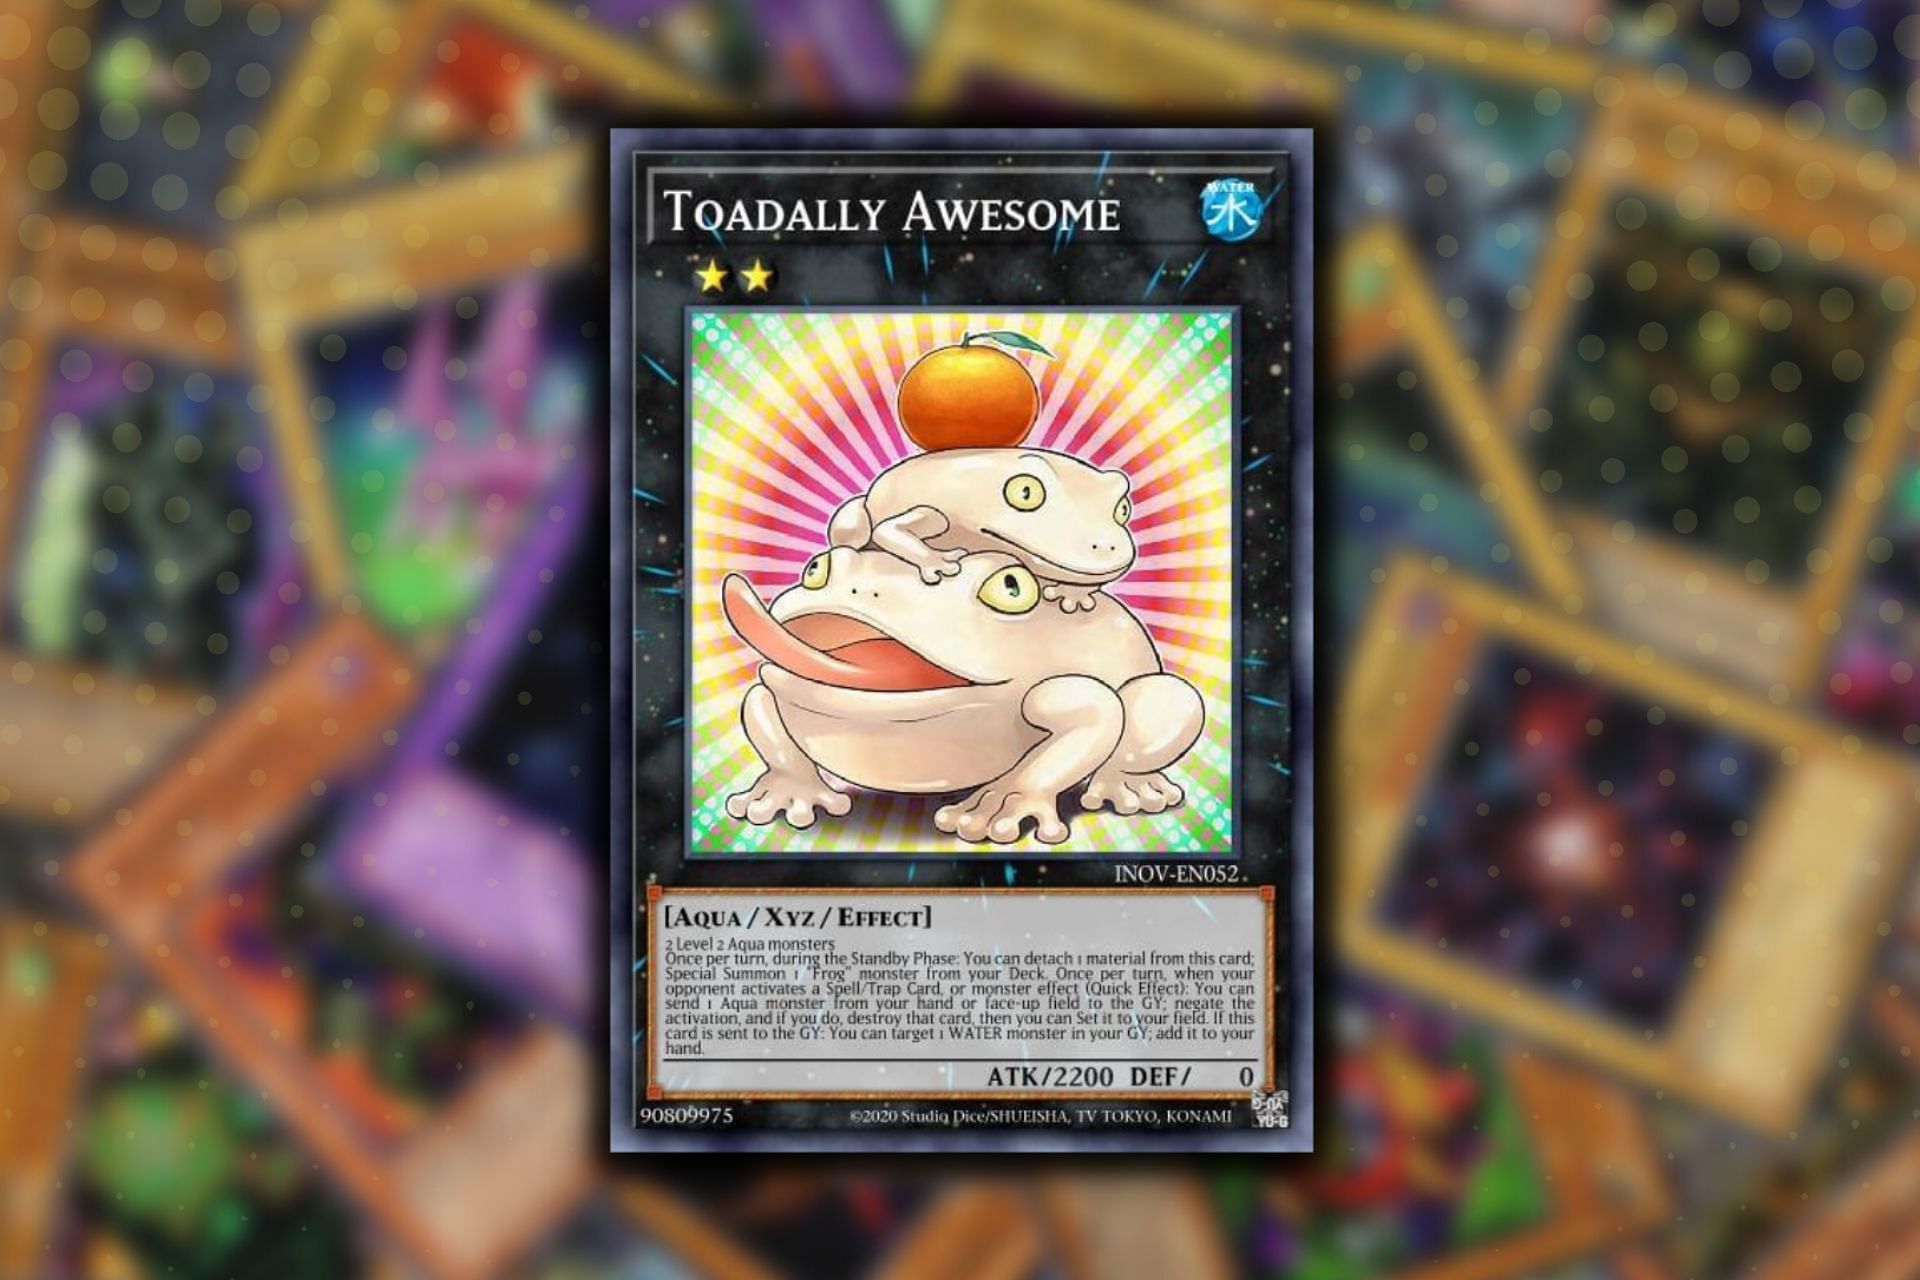 Toadally Awesome has been banned!